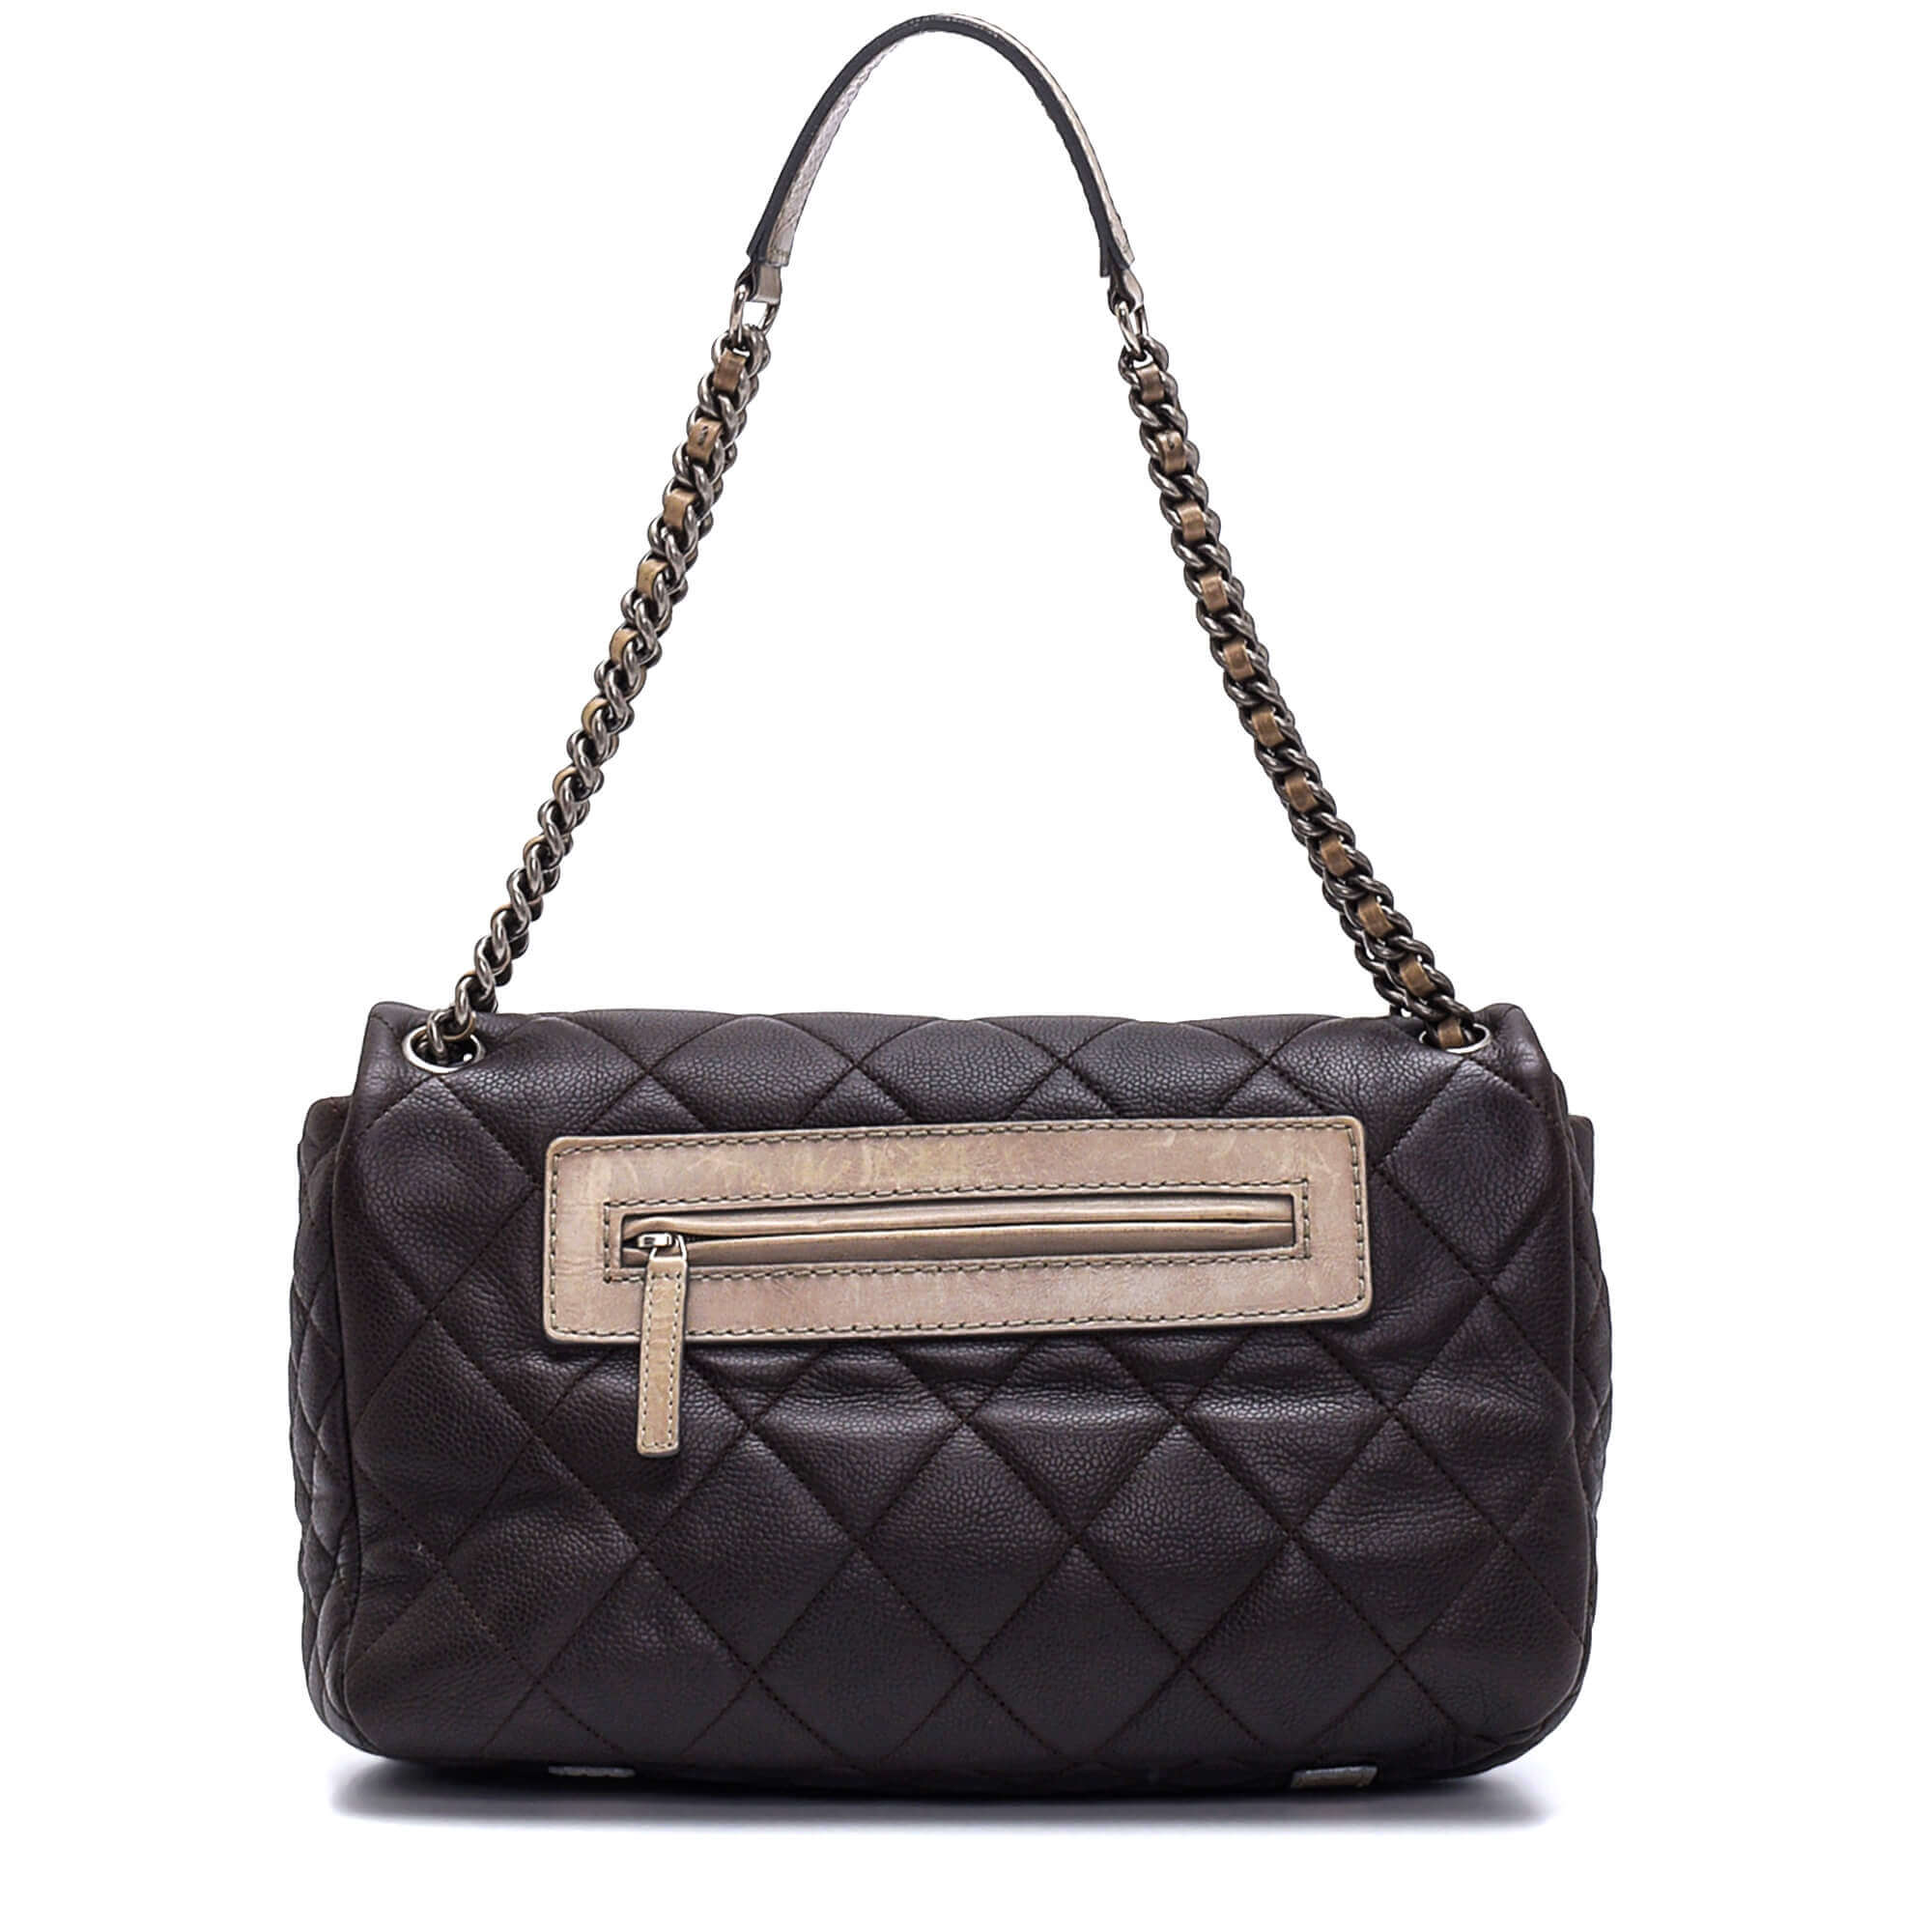 Chanel - Dark Brown Quilted Caviar Leather Flap Bag